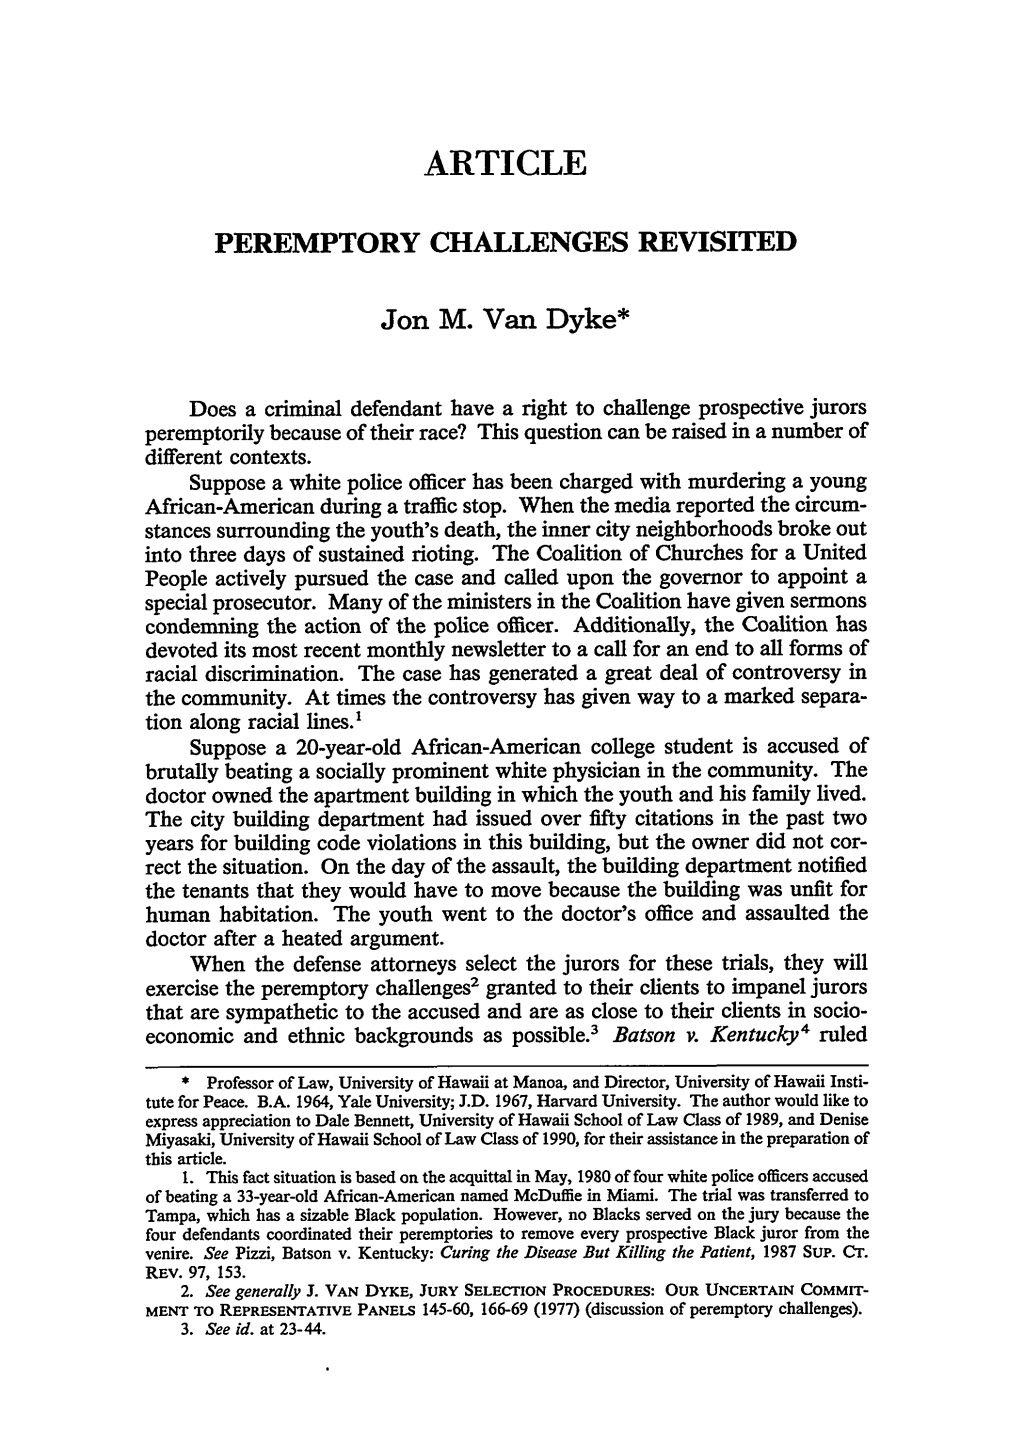 Peremptory Challenges Revisited